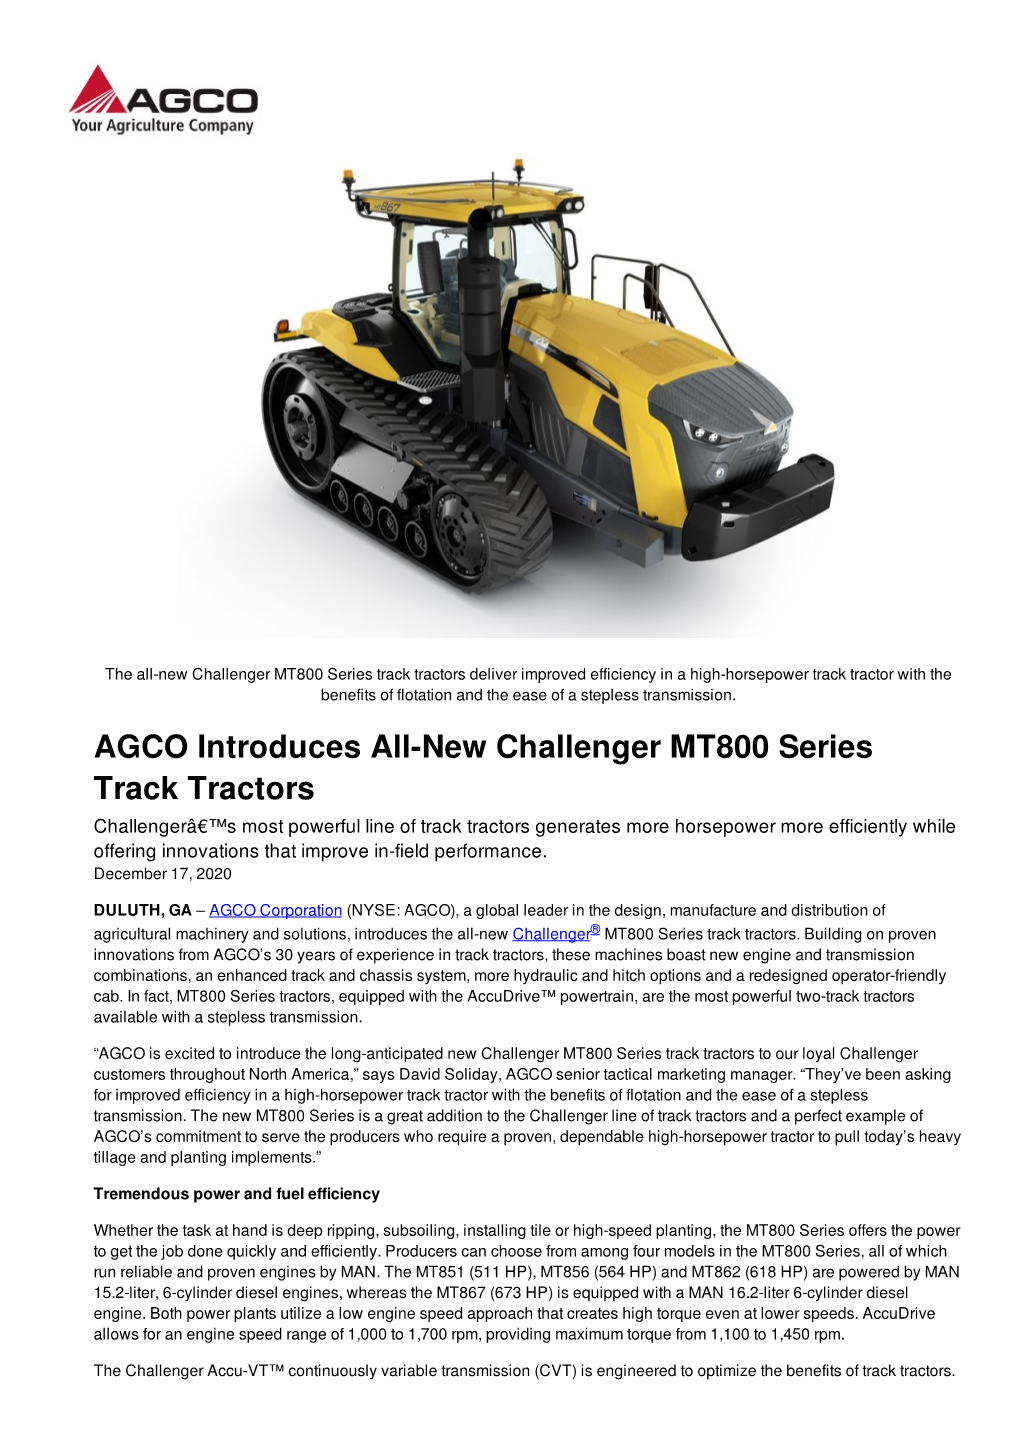 AGCO Introduces All-New Challenger MT800 Series Track Tractors